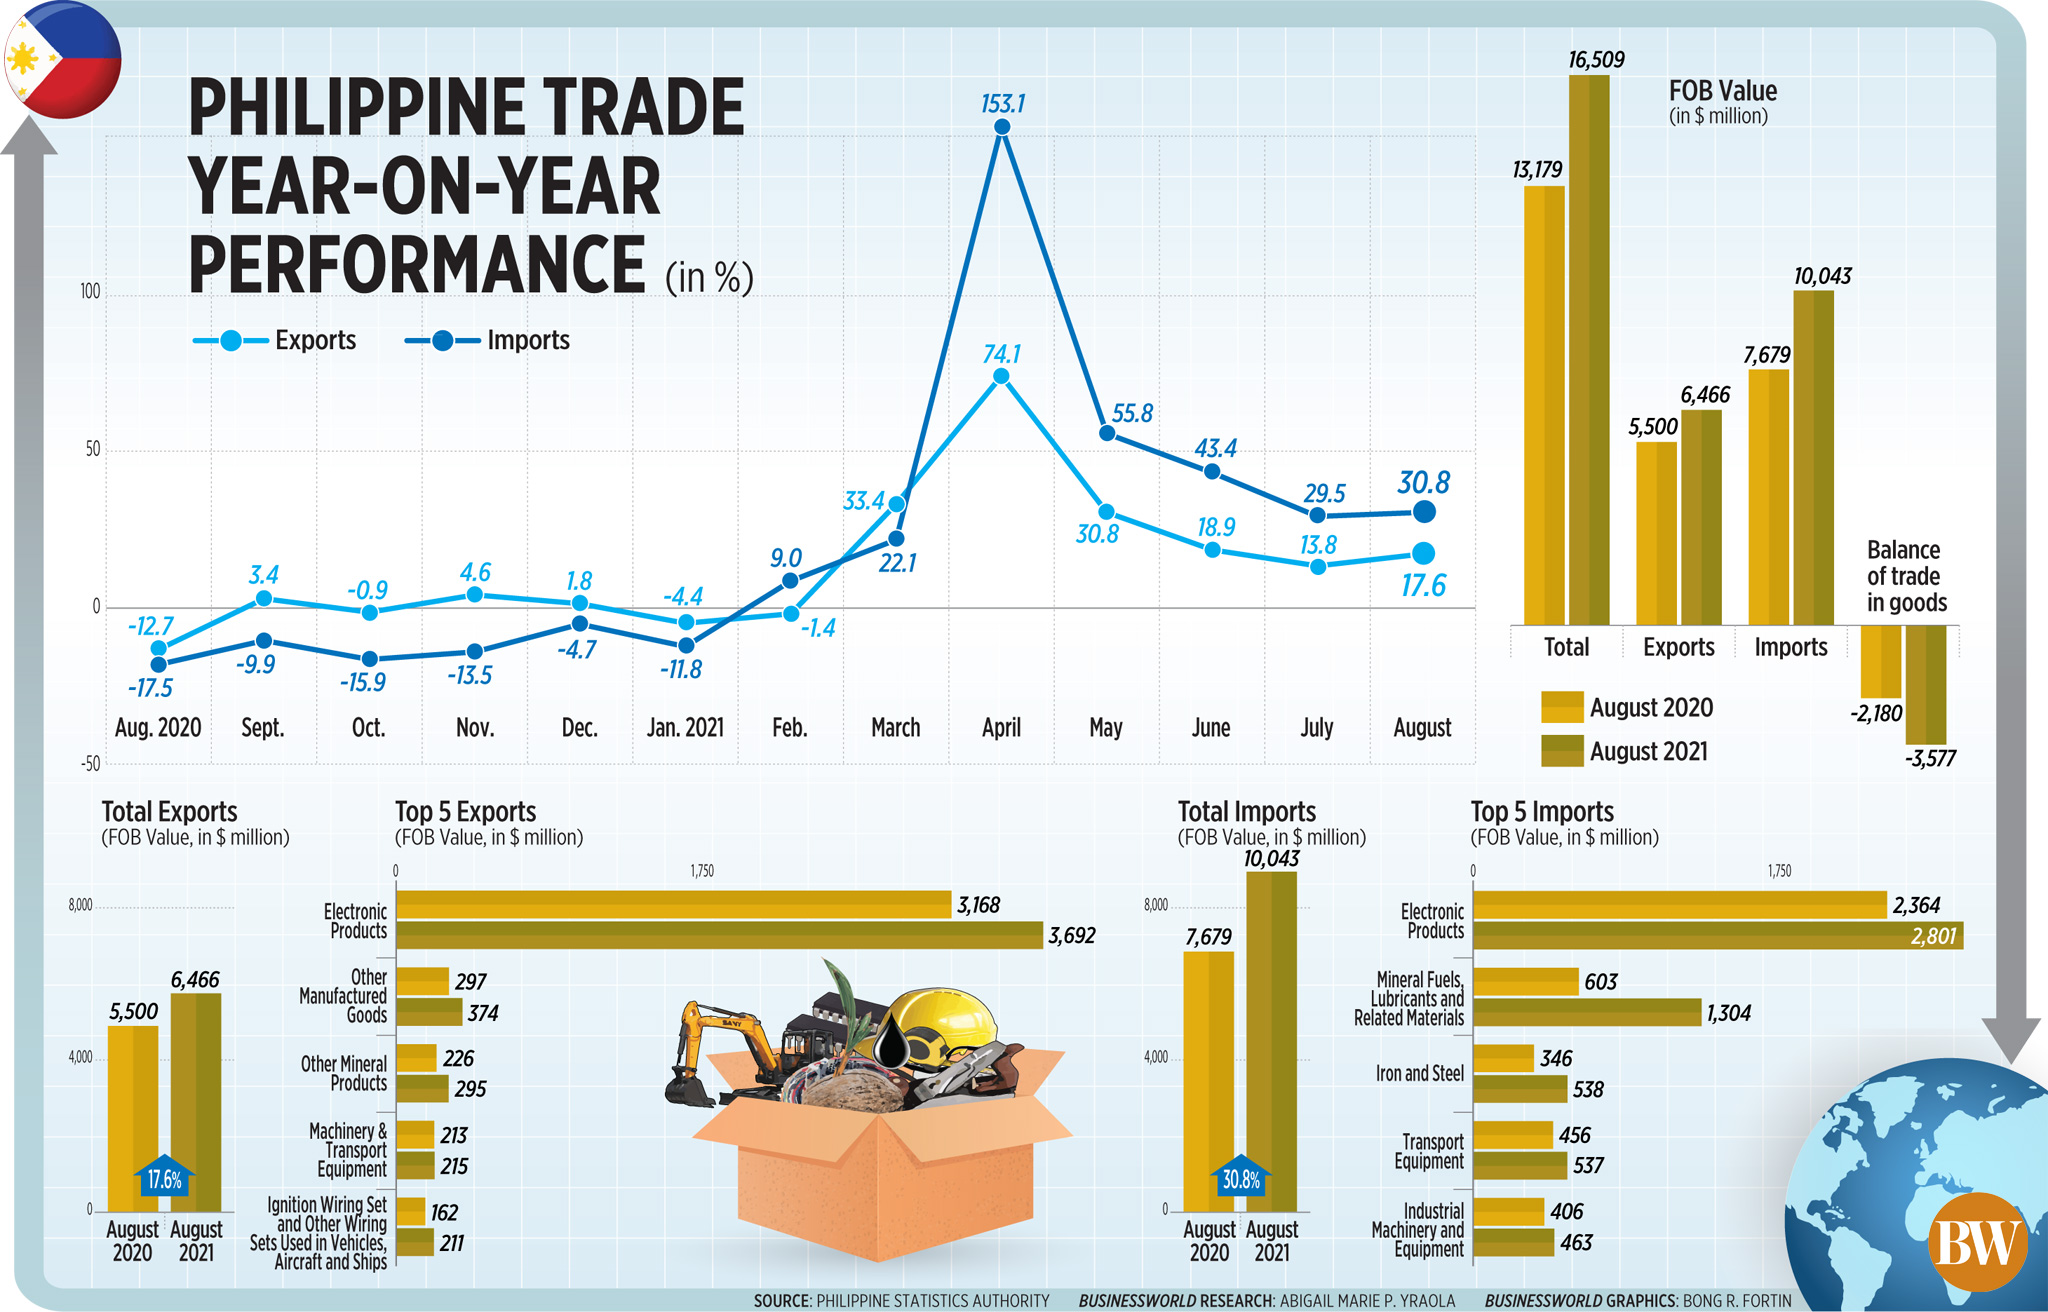 Philippine trade year-on-year performance (Aug. 2021)